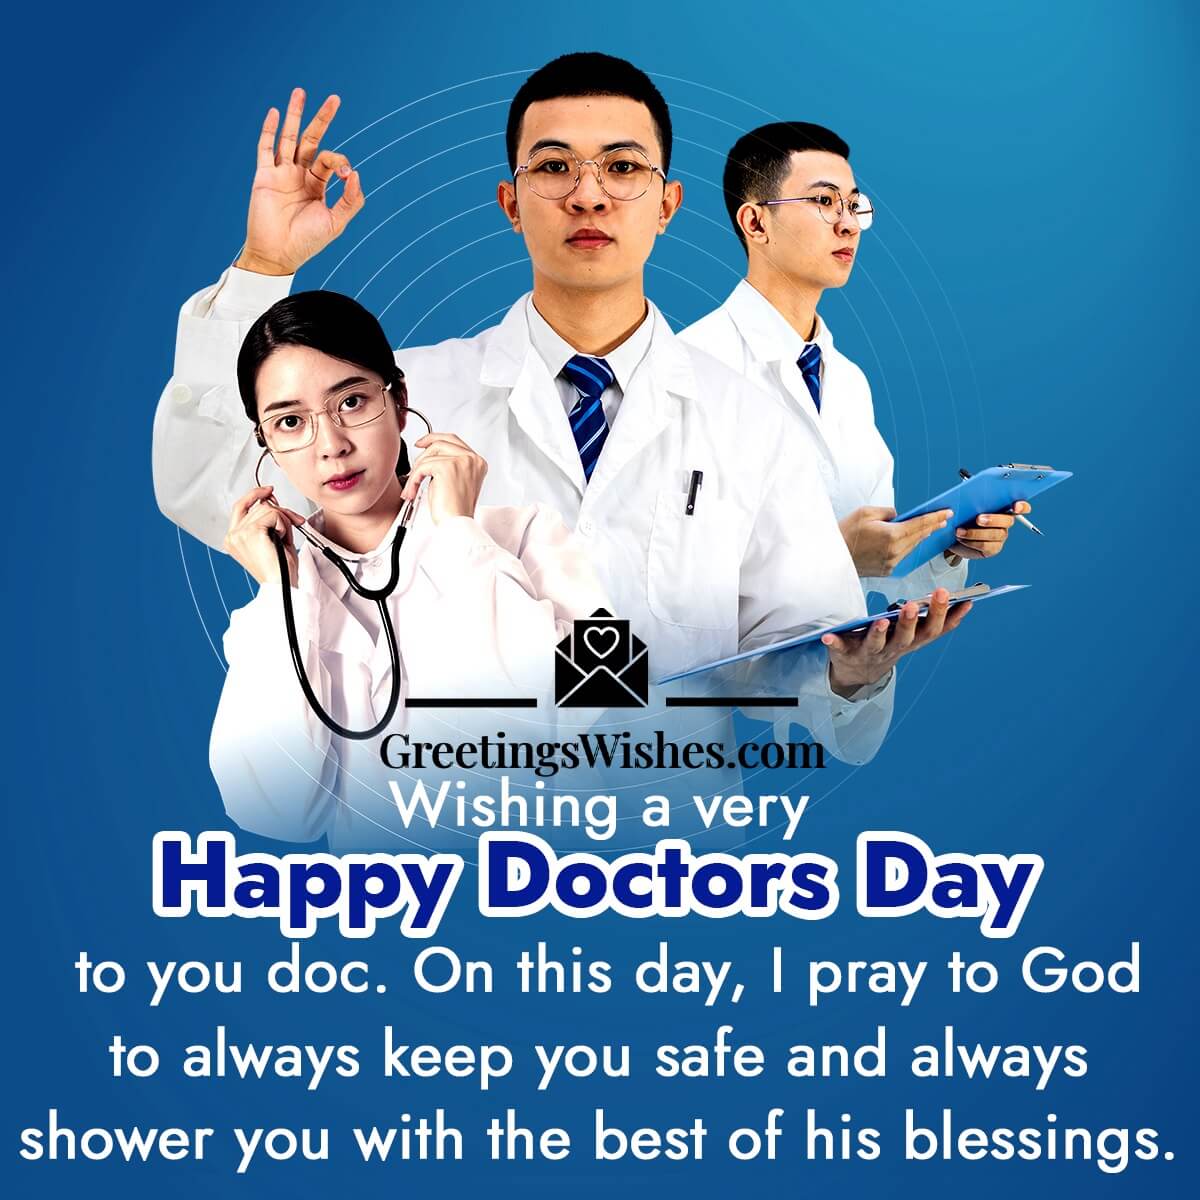 Happy Doctors’ Day Wishes